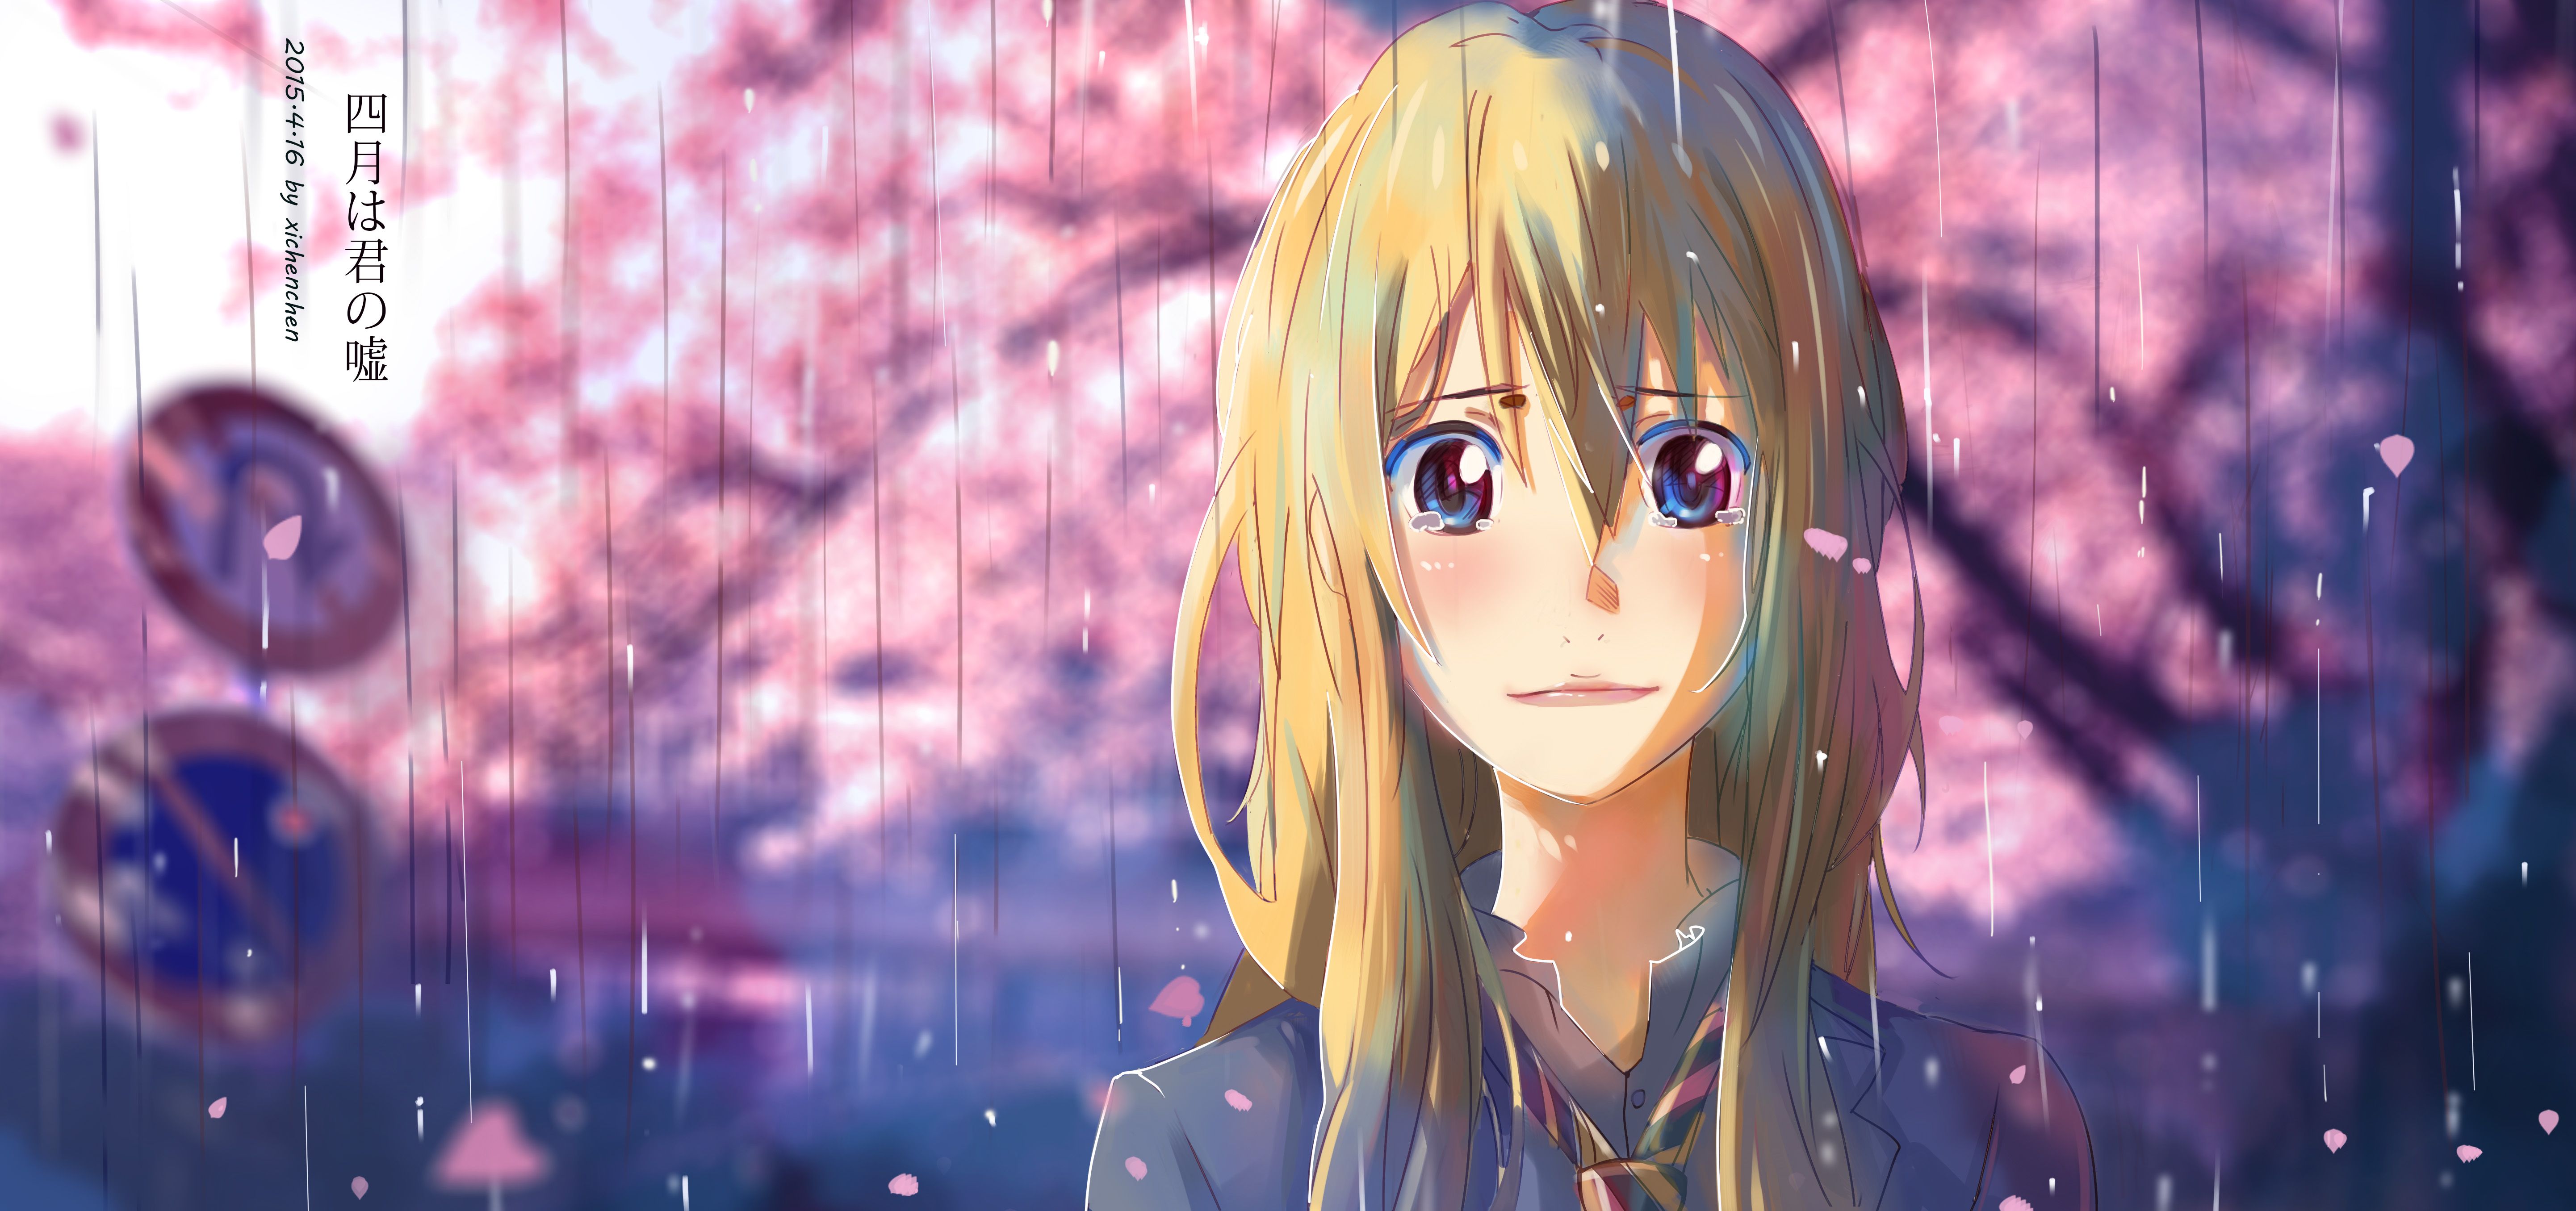 4k Anime Your Lie In April - HD Wallpaper 